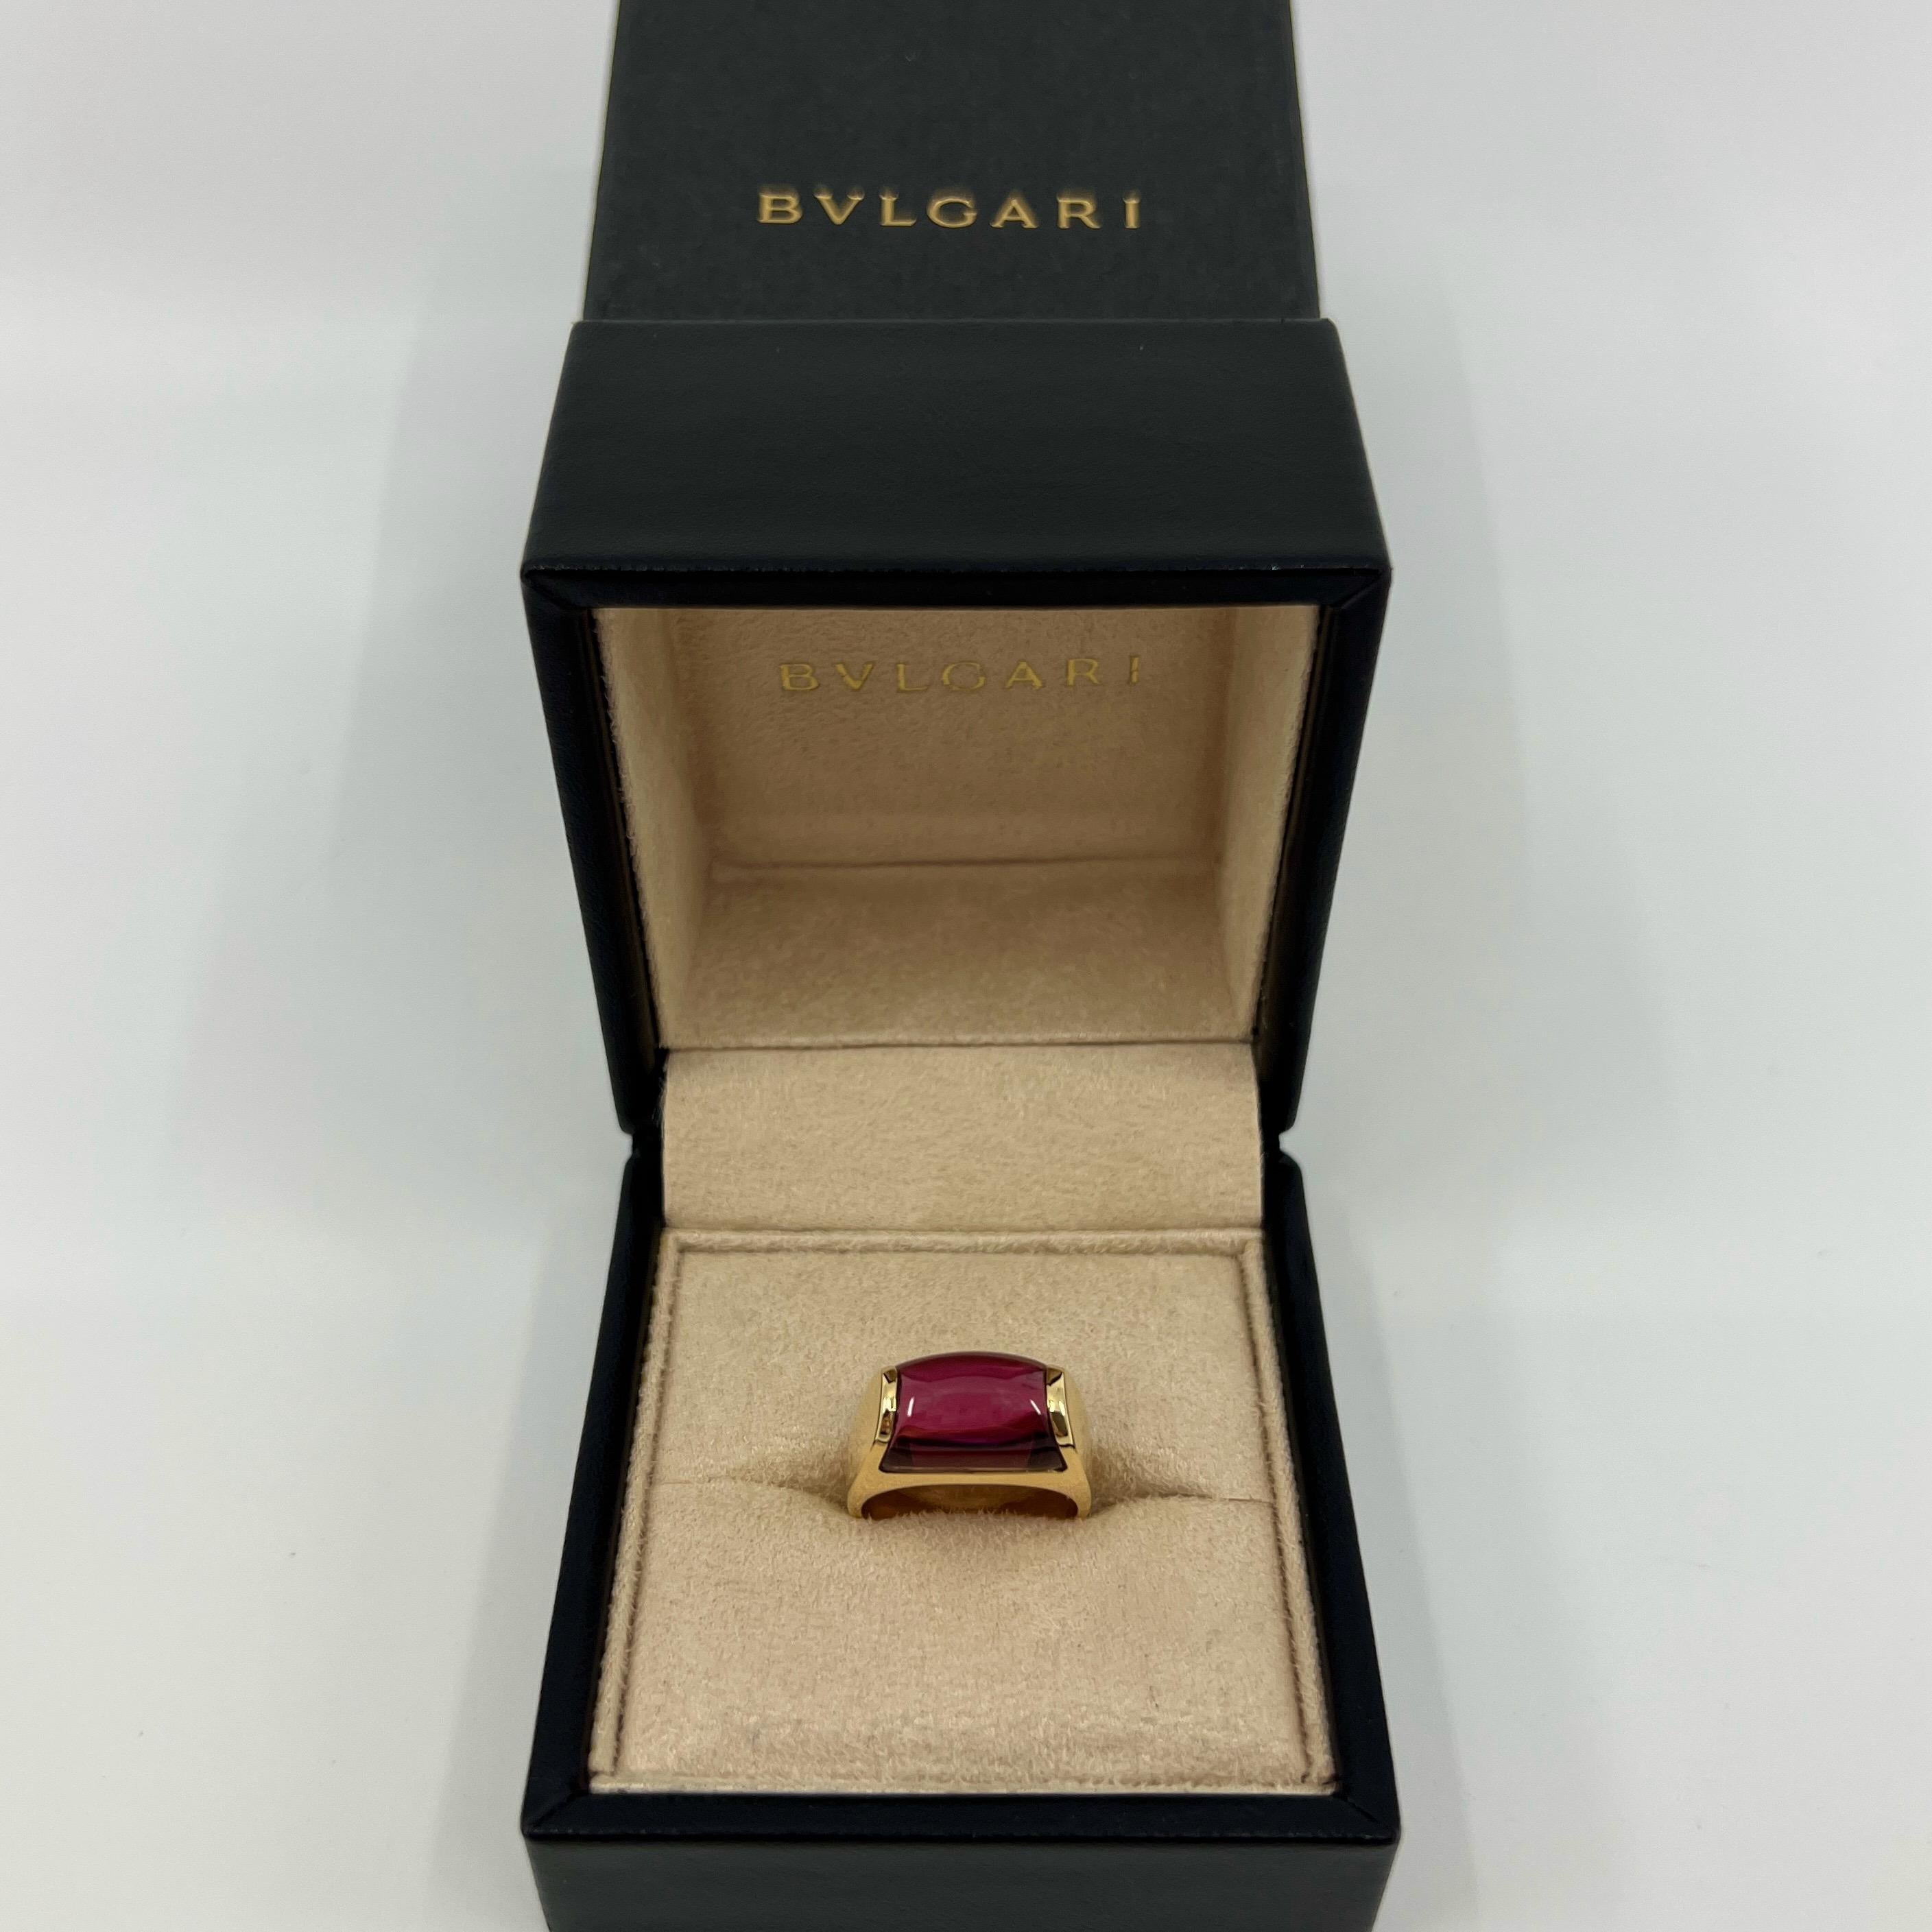 Rare Vintage Bvlgari Pink Rubellite Tourmaline Tronchetto 18k Yellow Gold Ring.

Beautiful domed rubellite pink tourmaline set in a fine 18k yellow gold tension set ring. Some small natural inclusions in the tourmaline visible from certain